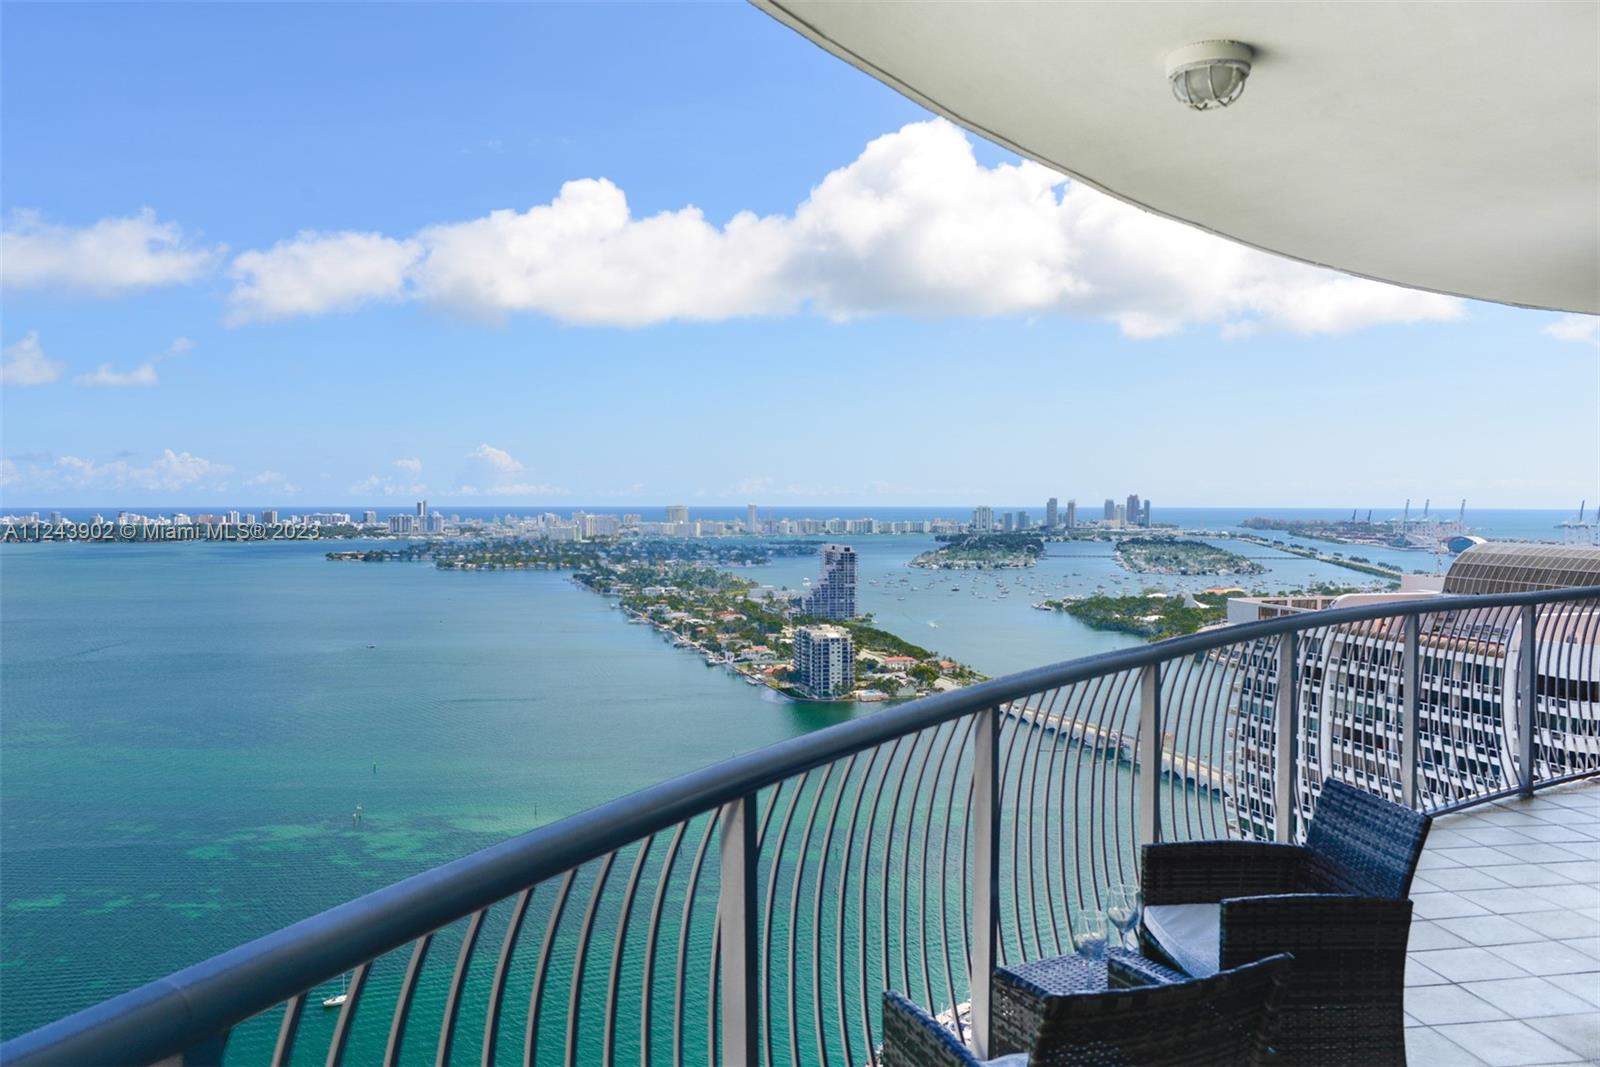 Best line in Opera Tower. Direct Ocean View, overlooking Miami Beach. 2 bedroom 2 bathroom.   Short-term Leases 30 Day minimum.  Impeccable unit with porcelain floor, open kitchen, stainless steel appliances. wraparound balcony with astounding Ocean views.   Opera Tower is located in Miami's most vibrant area, close to Wynwood, Midtown, Design District, and Downtown. Close to Adrienne Art Center, FTX Arena, and The Perez Art Museum of Science.   The 9-Acre waterfront park is right in front of the building. 31 Day Monthly rentals are allowed.  In very good condition long term tenants.  low use.